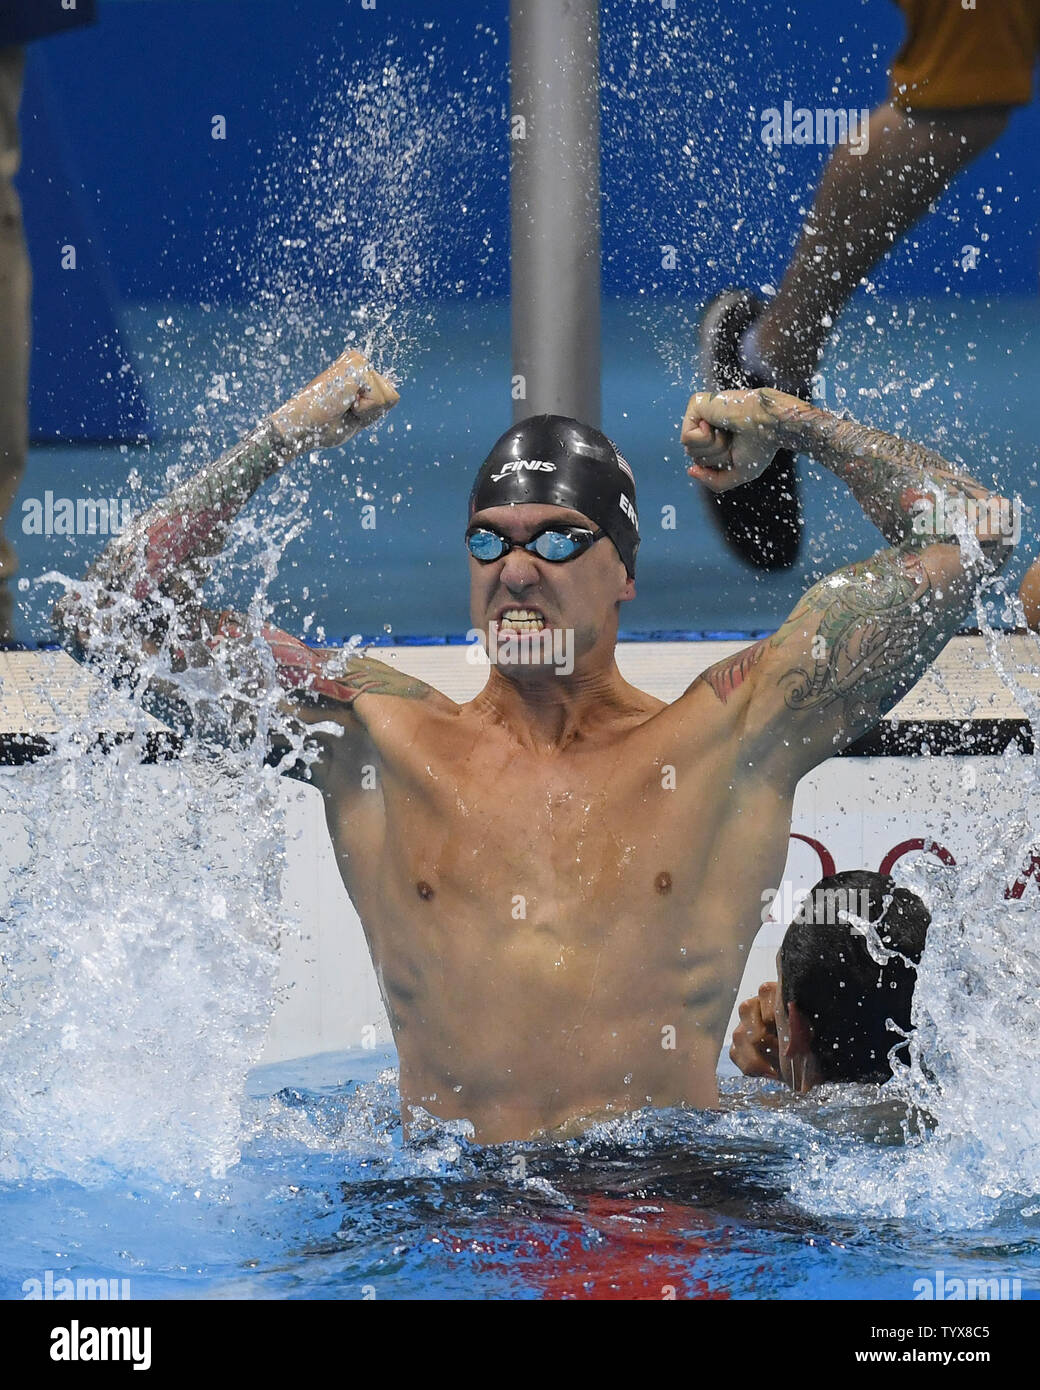 Anthony Ervin (USA) reacts after winning the Men's 50M Freestyle with a time of 21.4 in the Olympic Aquatics Stadium at the 2016 Rio Summer Olympics in Rio de Janeiro, Brazil, on August 12, 2016. Richard Ellis/UPI Stock Photo